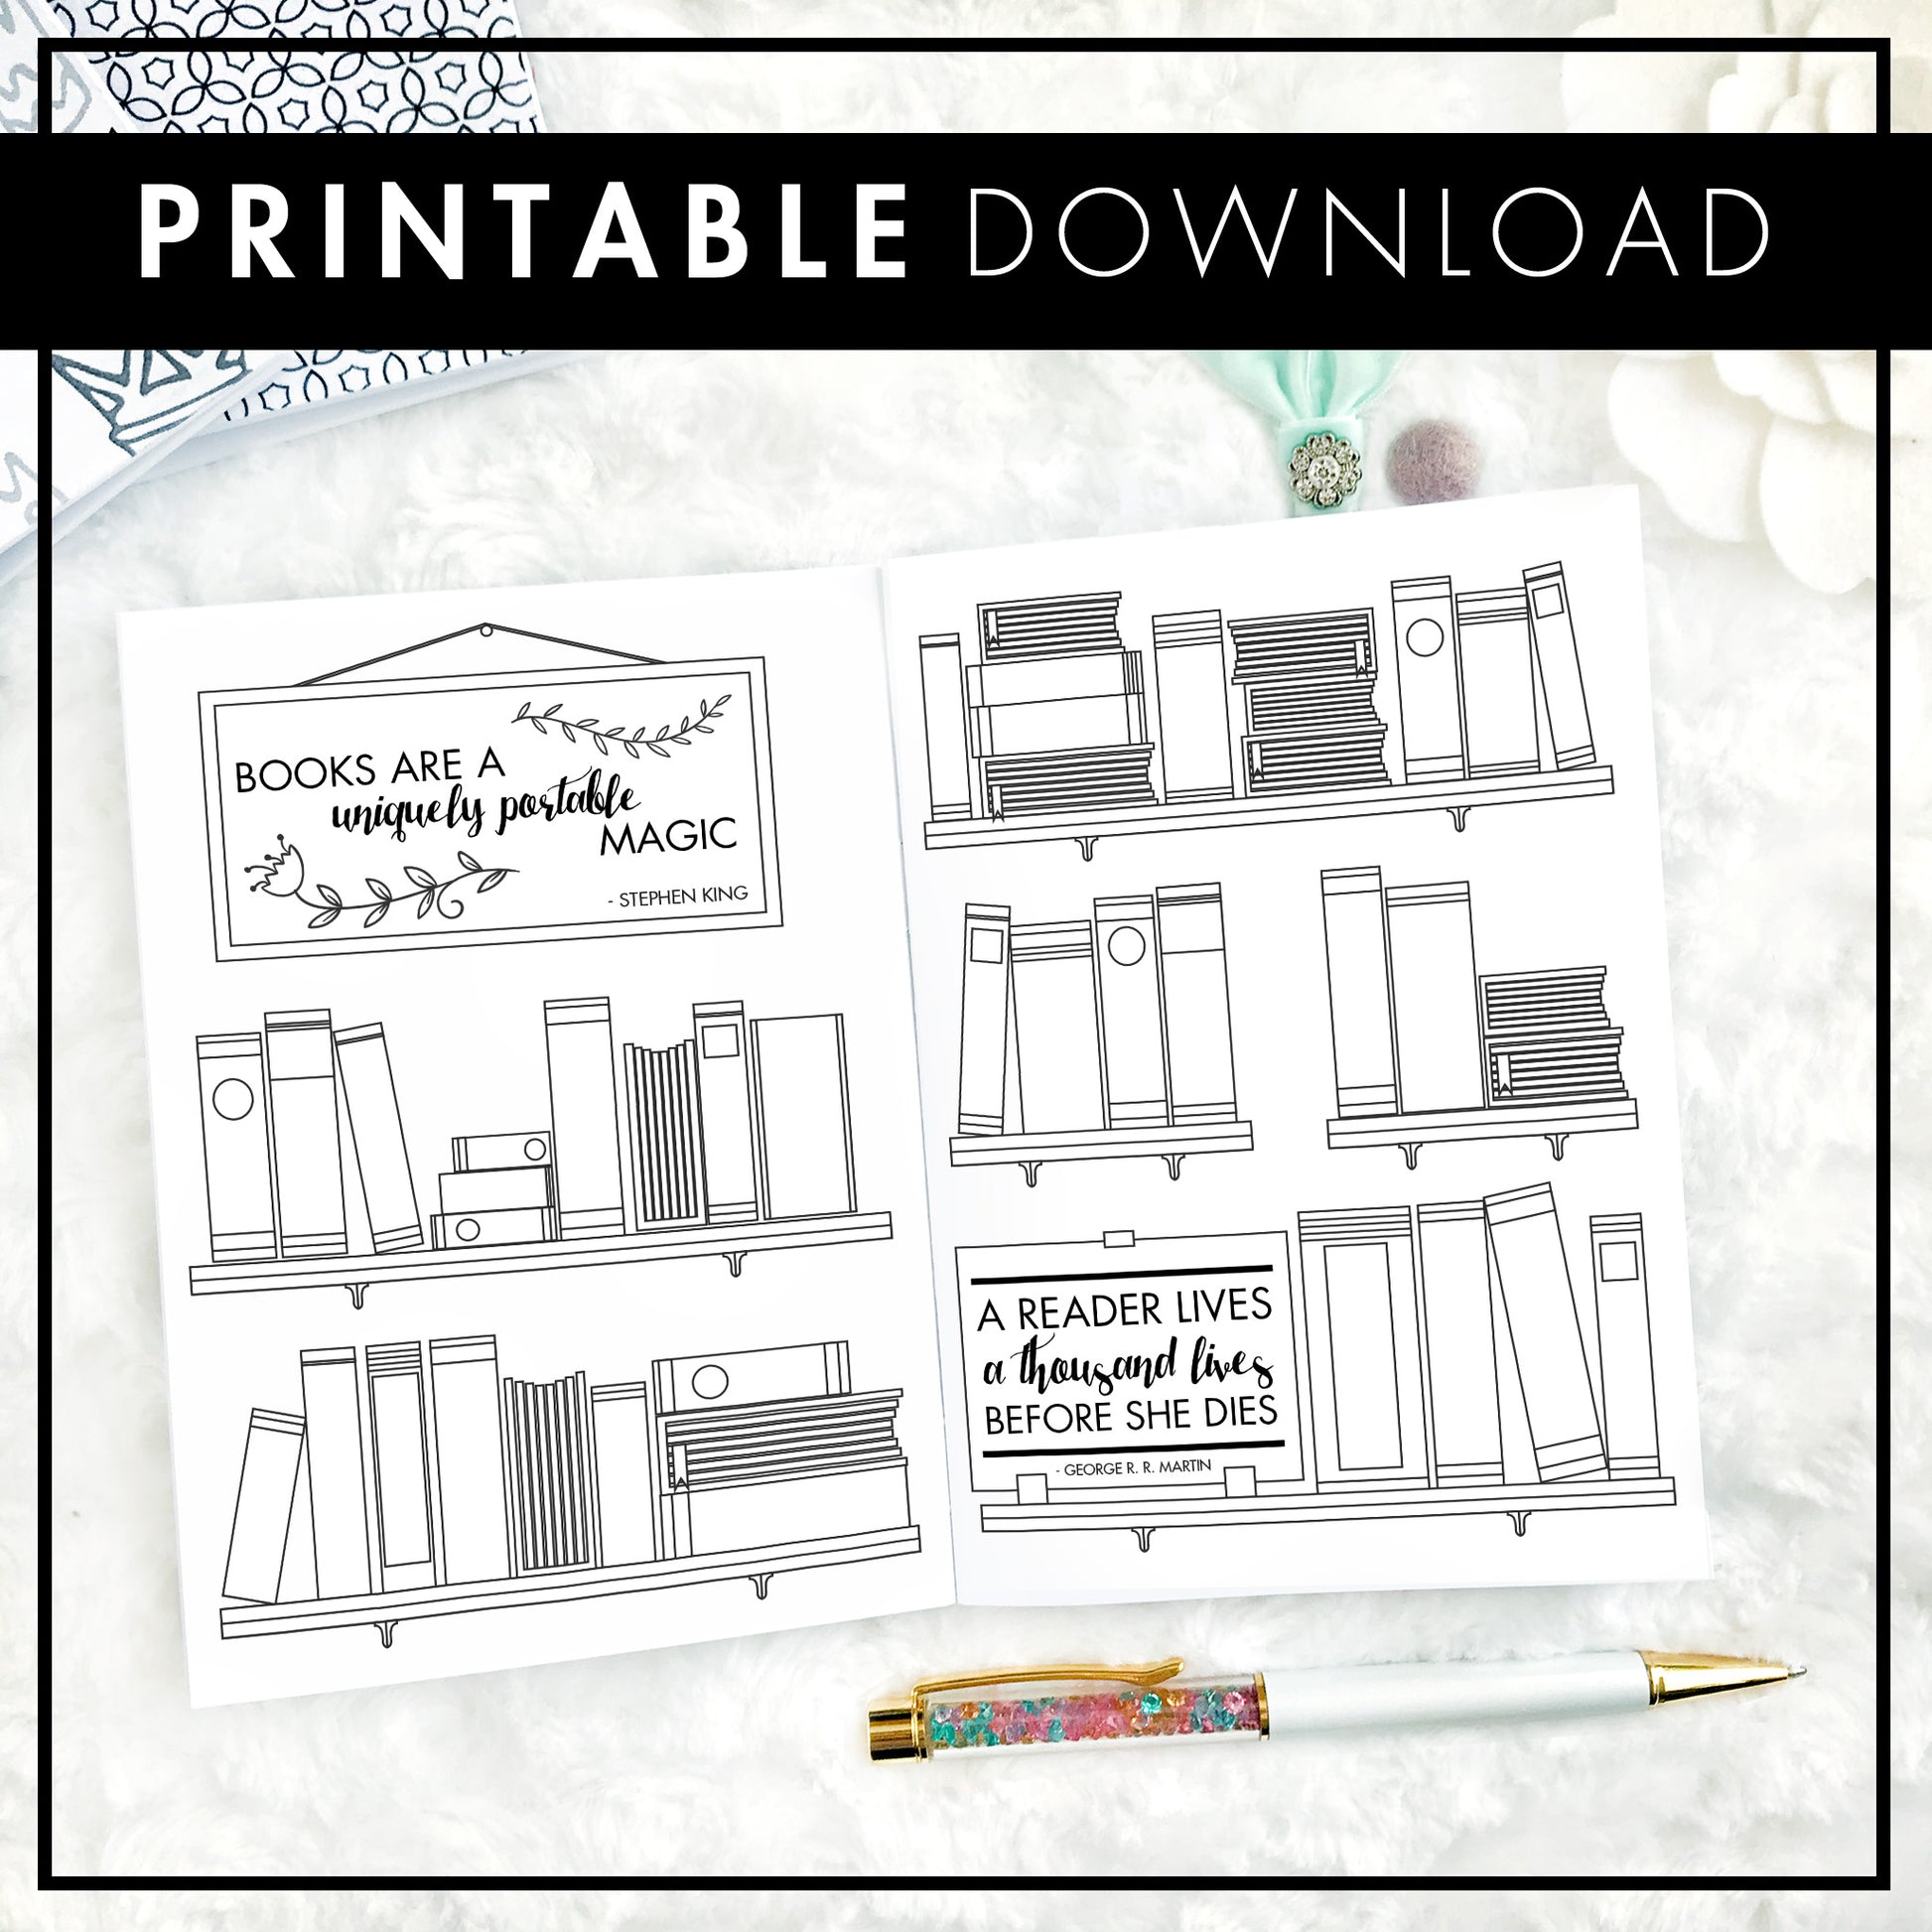 Reading Tracker Yearly Reading Tracker Reading Pages Tracker Printable  Planner Page Printable Page Bullet Journal 